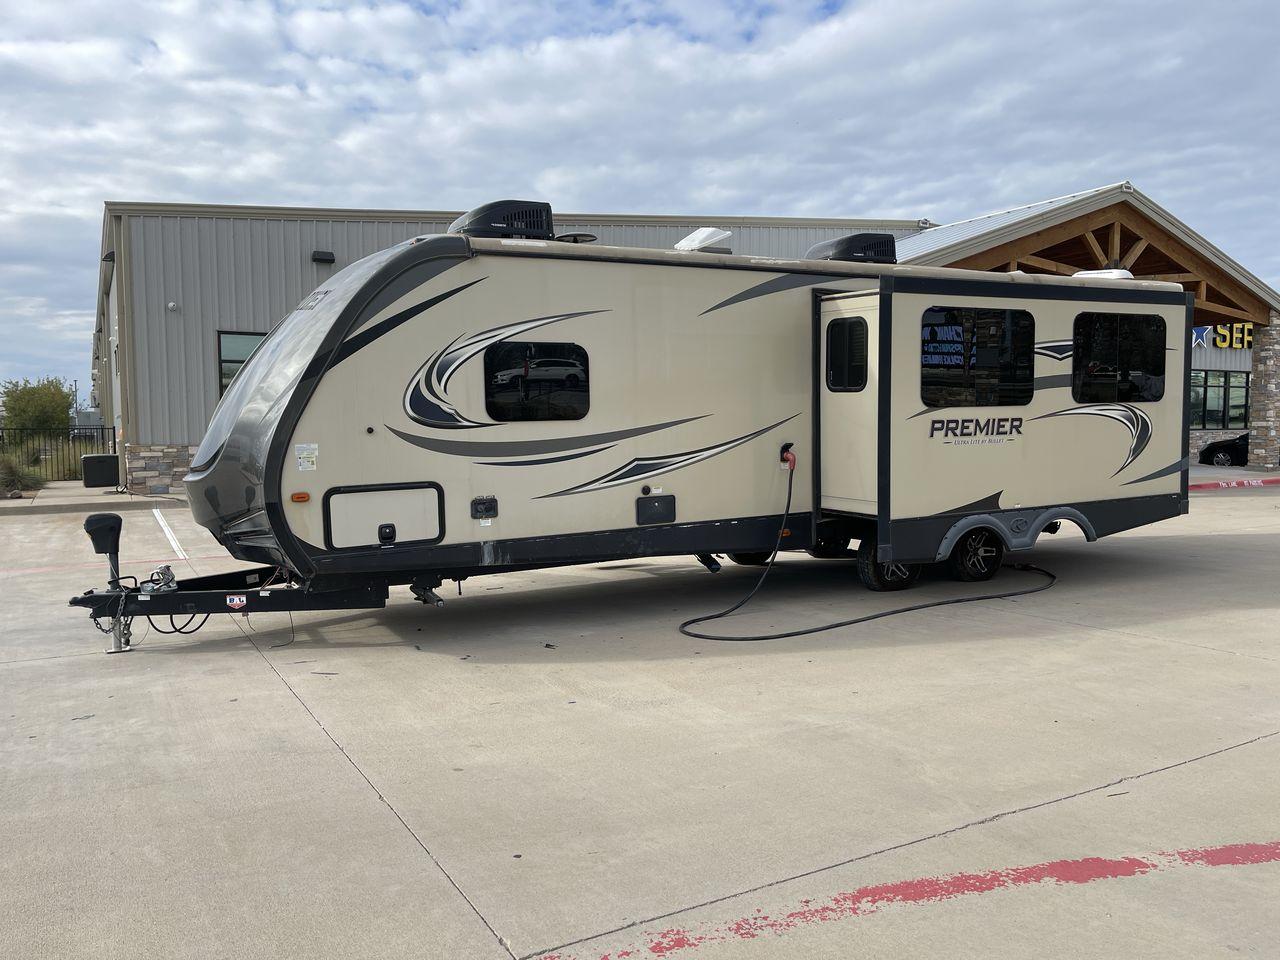 2018 BLACK KEYSTONE PREMIER 30RIPR (4YDT29R22JD) , Length: 35.42 ft. | Dry Weight: 6,675 lbs. | Gross Weight: 8,200 lbs. | Slides: 2 transmission, located at 4319 N Main St, Cleburne, TX, 76033, (817) 678-5133, 32.385960, -97.391212 - Photo #23